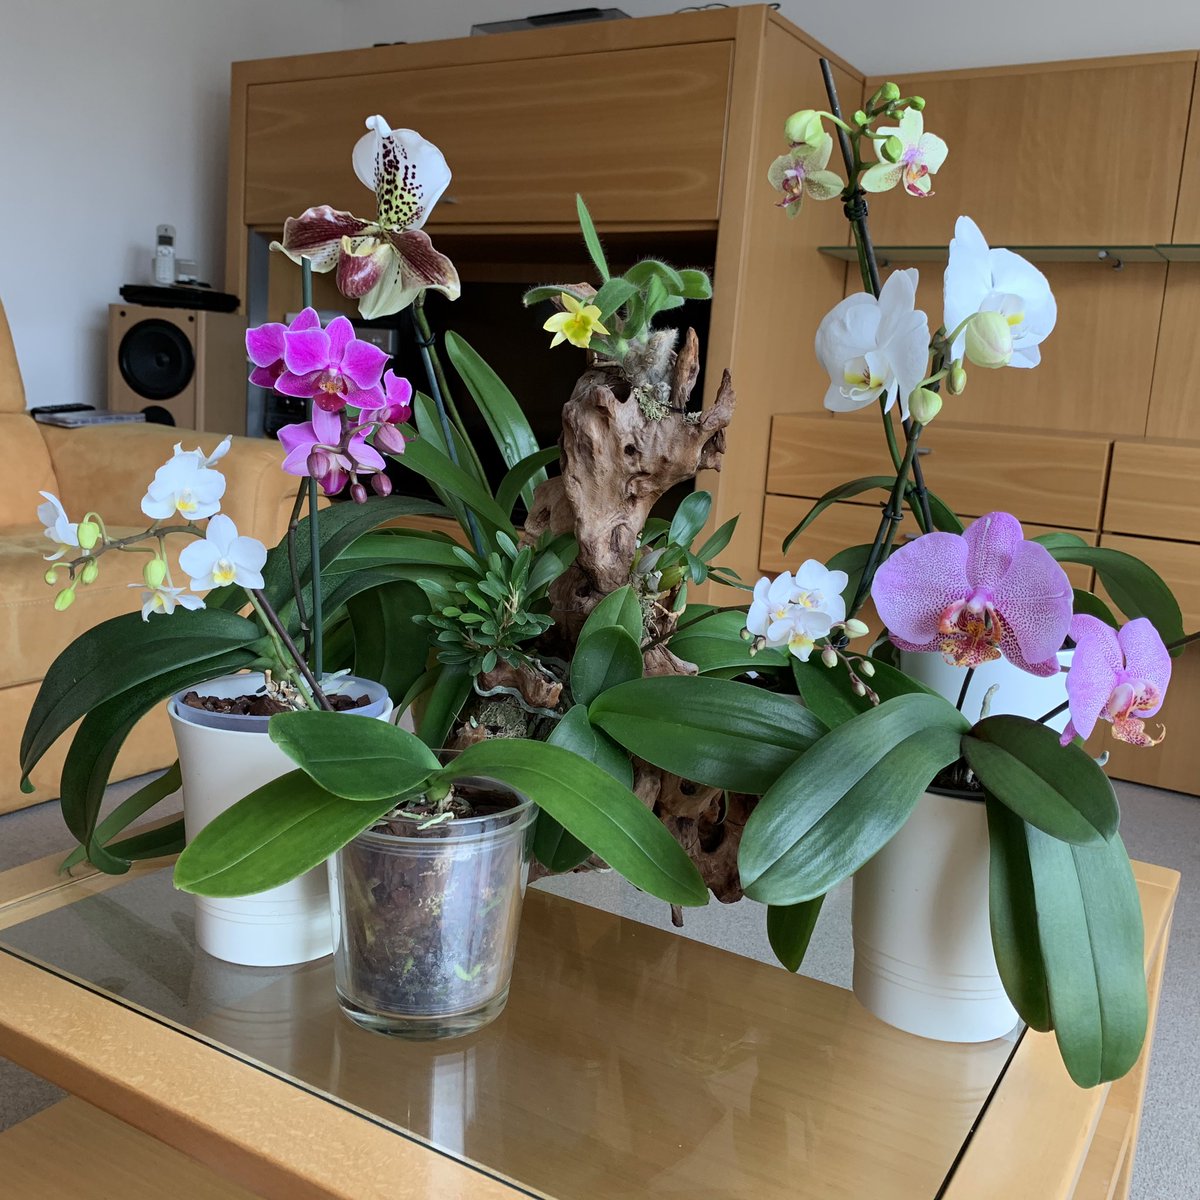 Some if my orchids 💗 Have a nice week everybody! #orchids #orchidées #loveorchids #flowers  #orchidaceae #happy